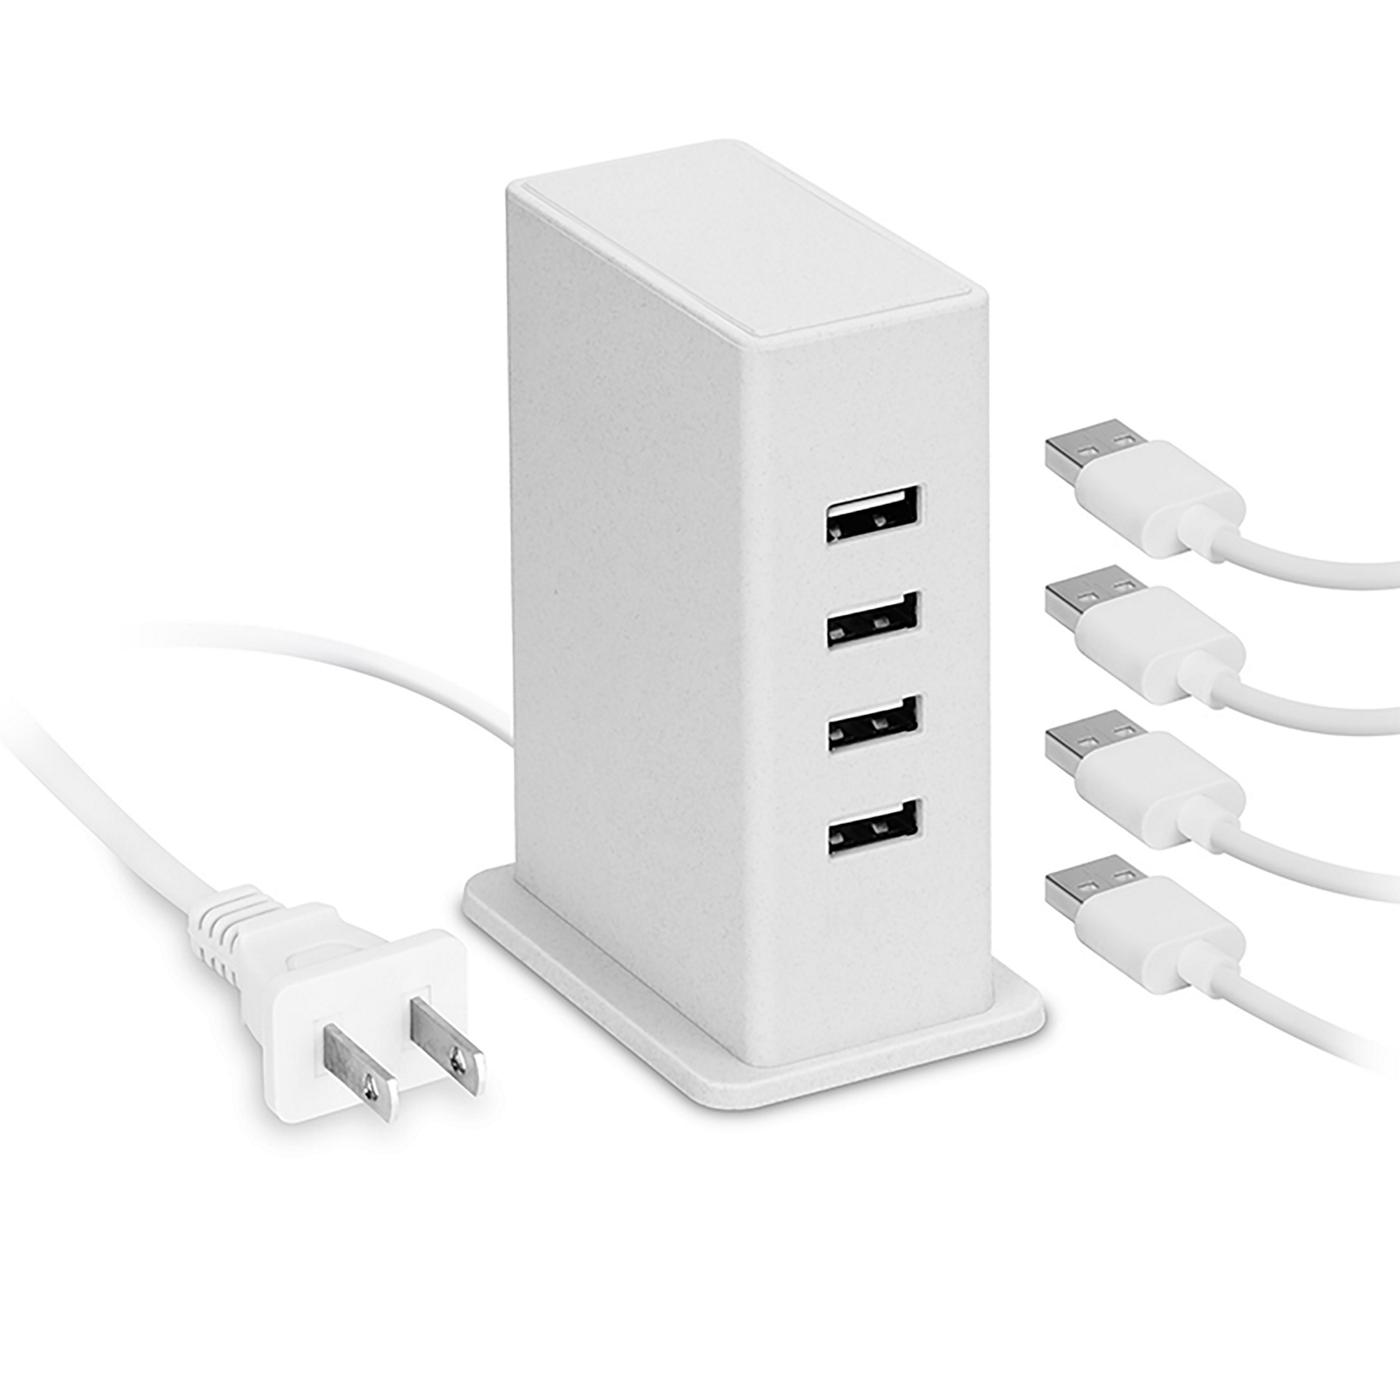 iHome 4-Port USB Power Station - White; image 2 of 2